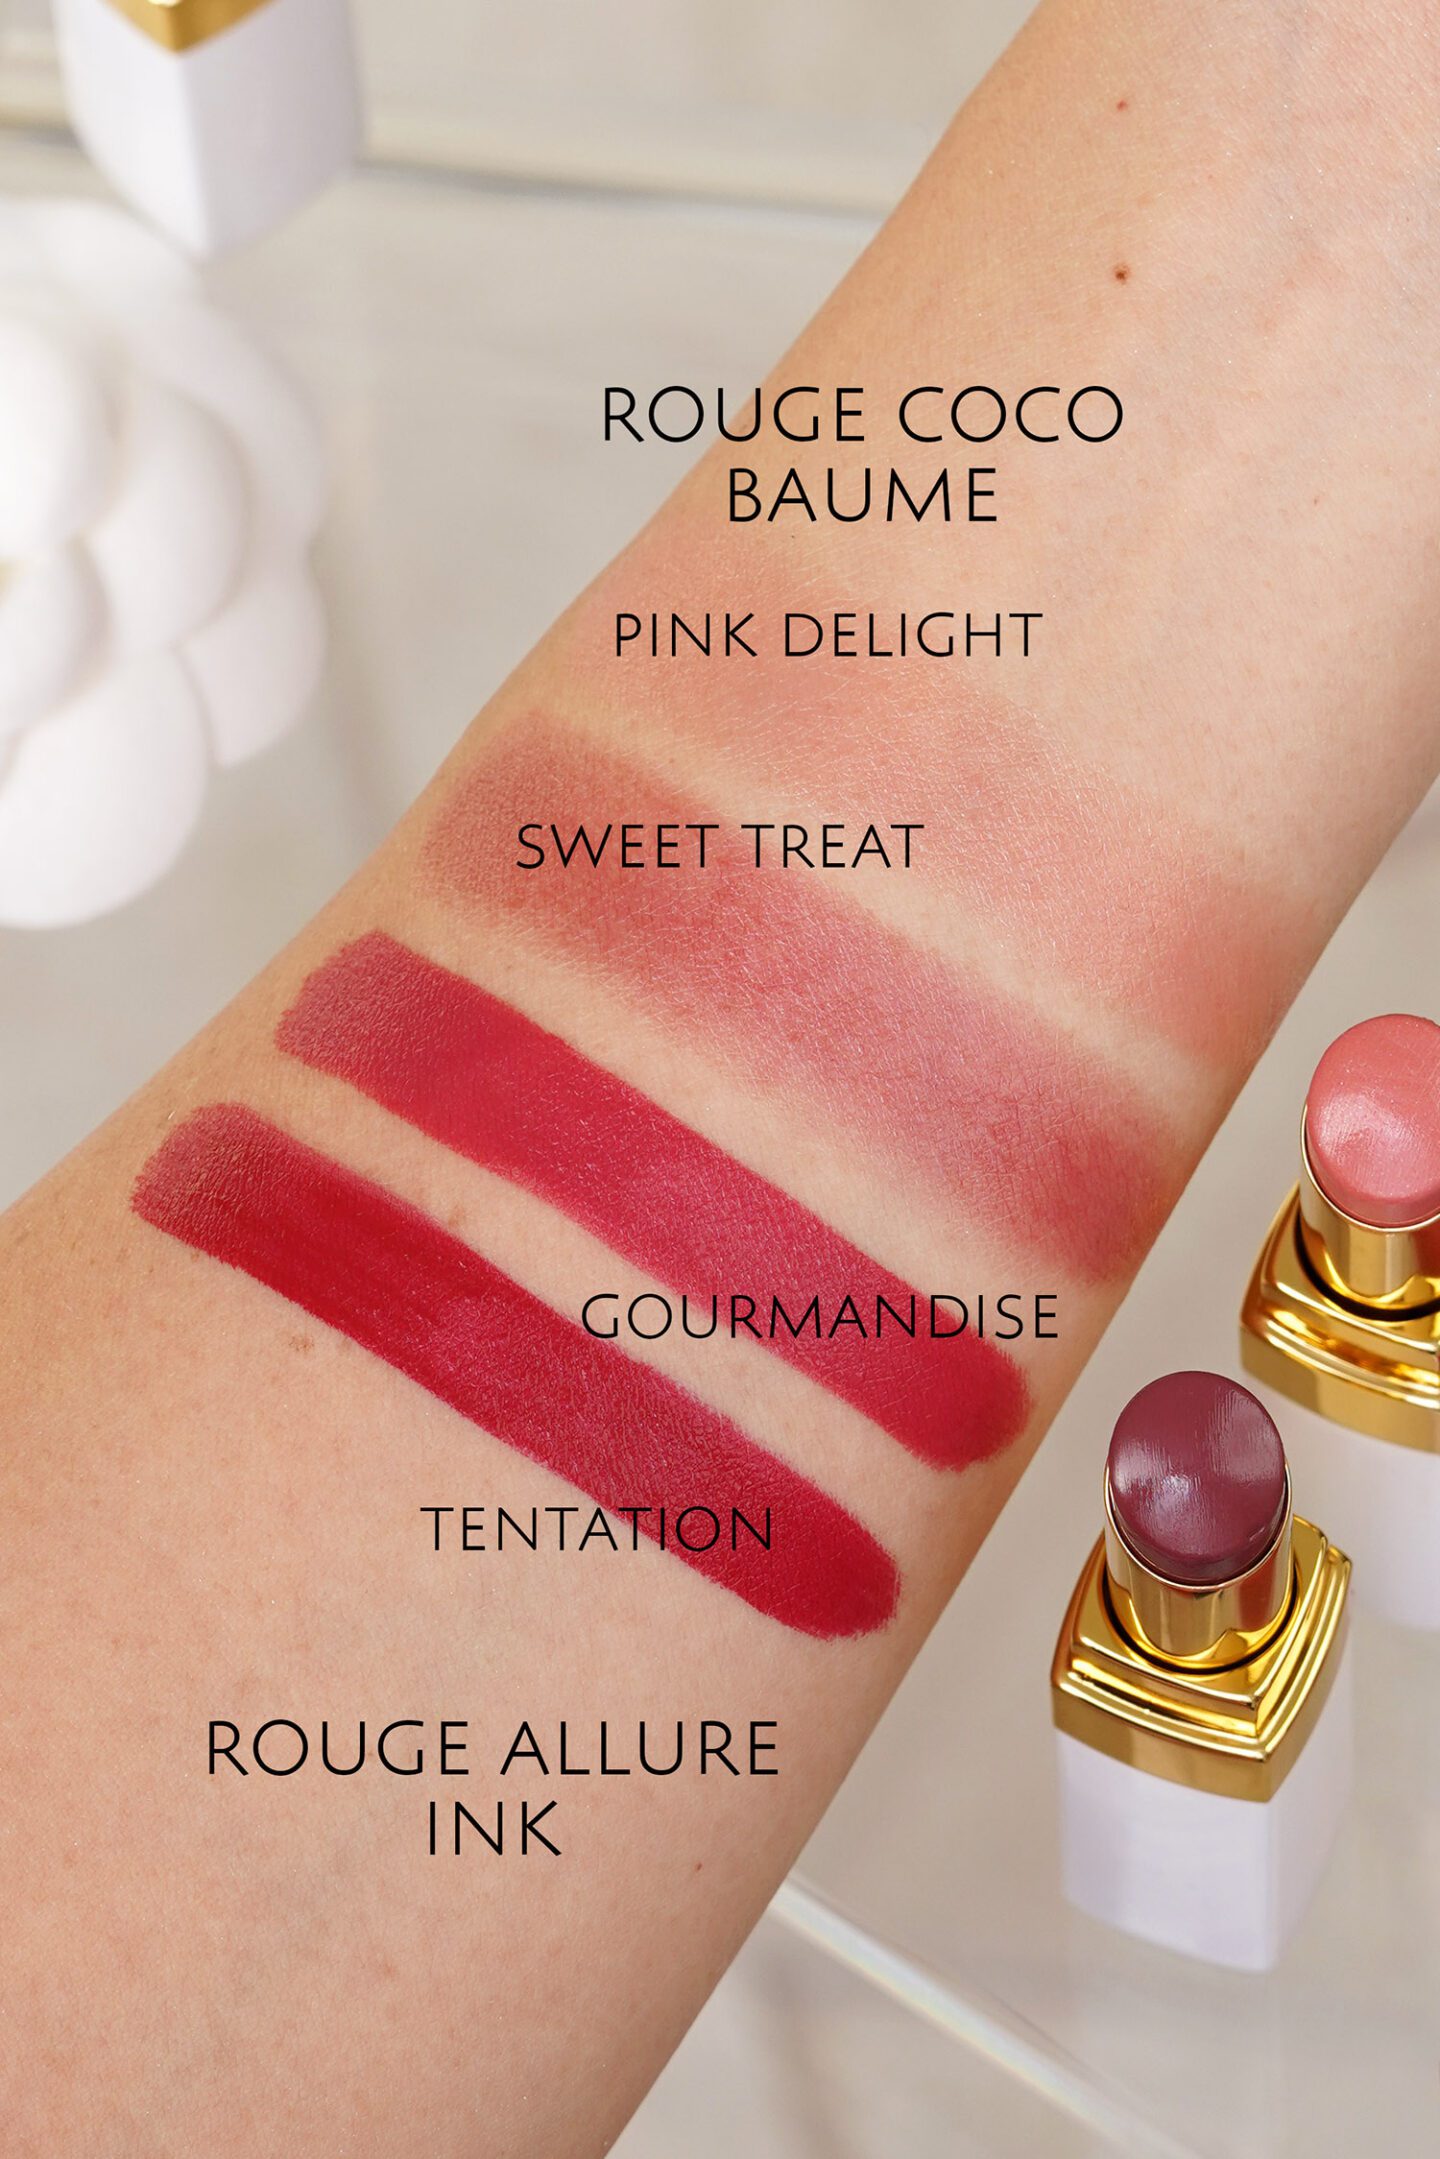 Chanel Les Delices Rouge Coco Baume and Rouge Allure Ink